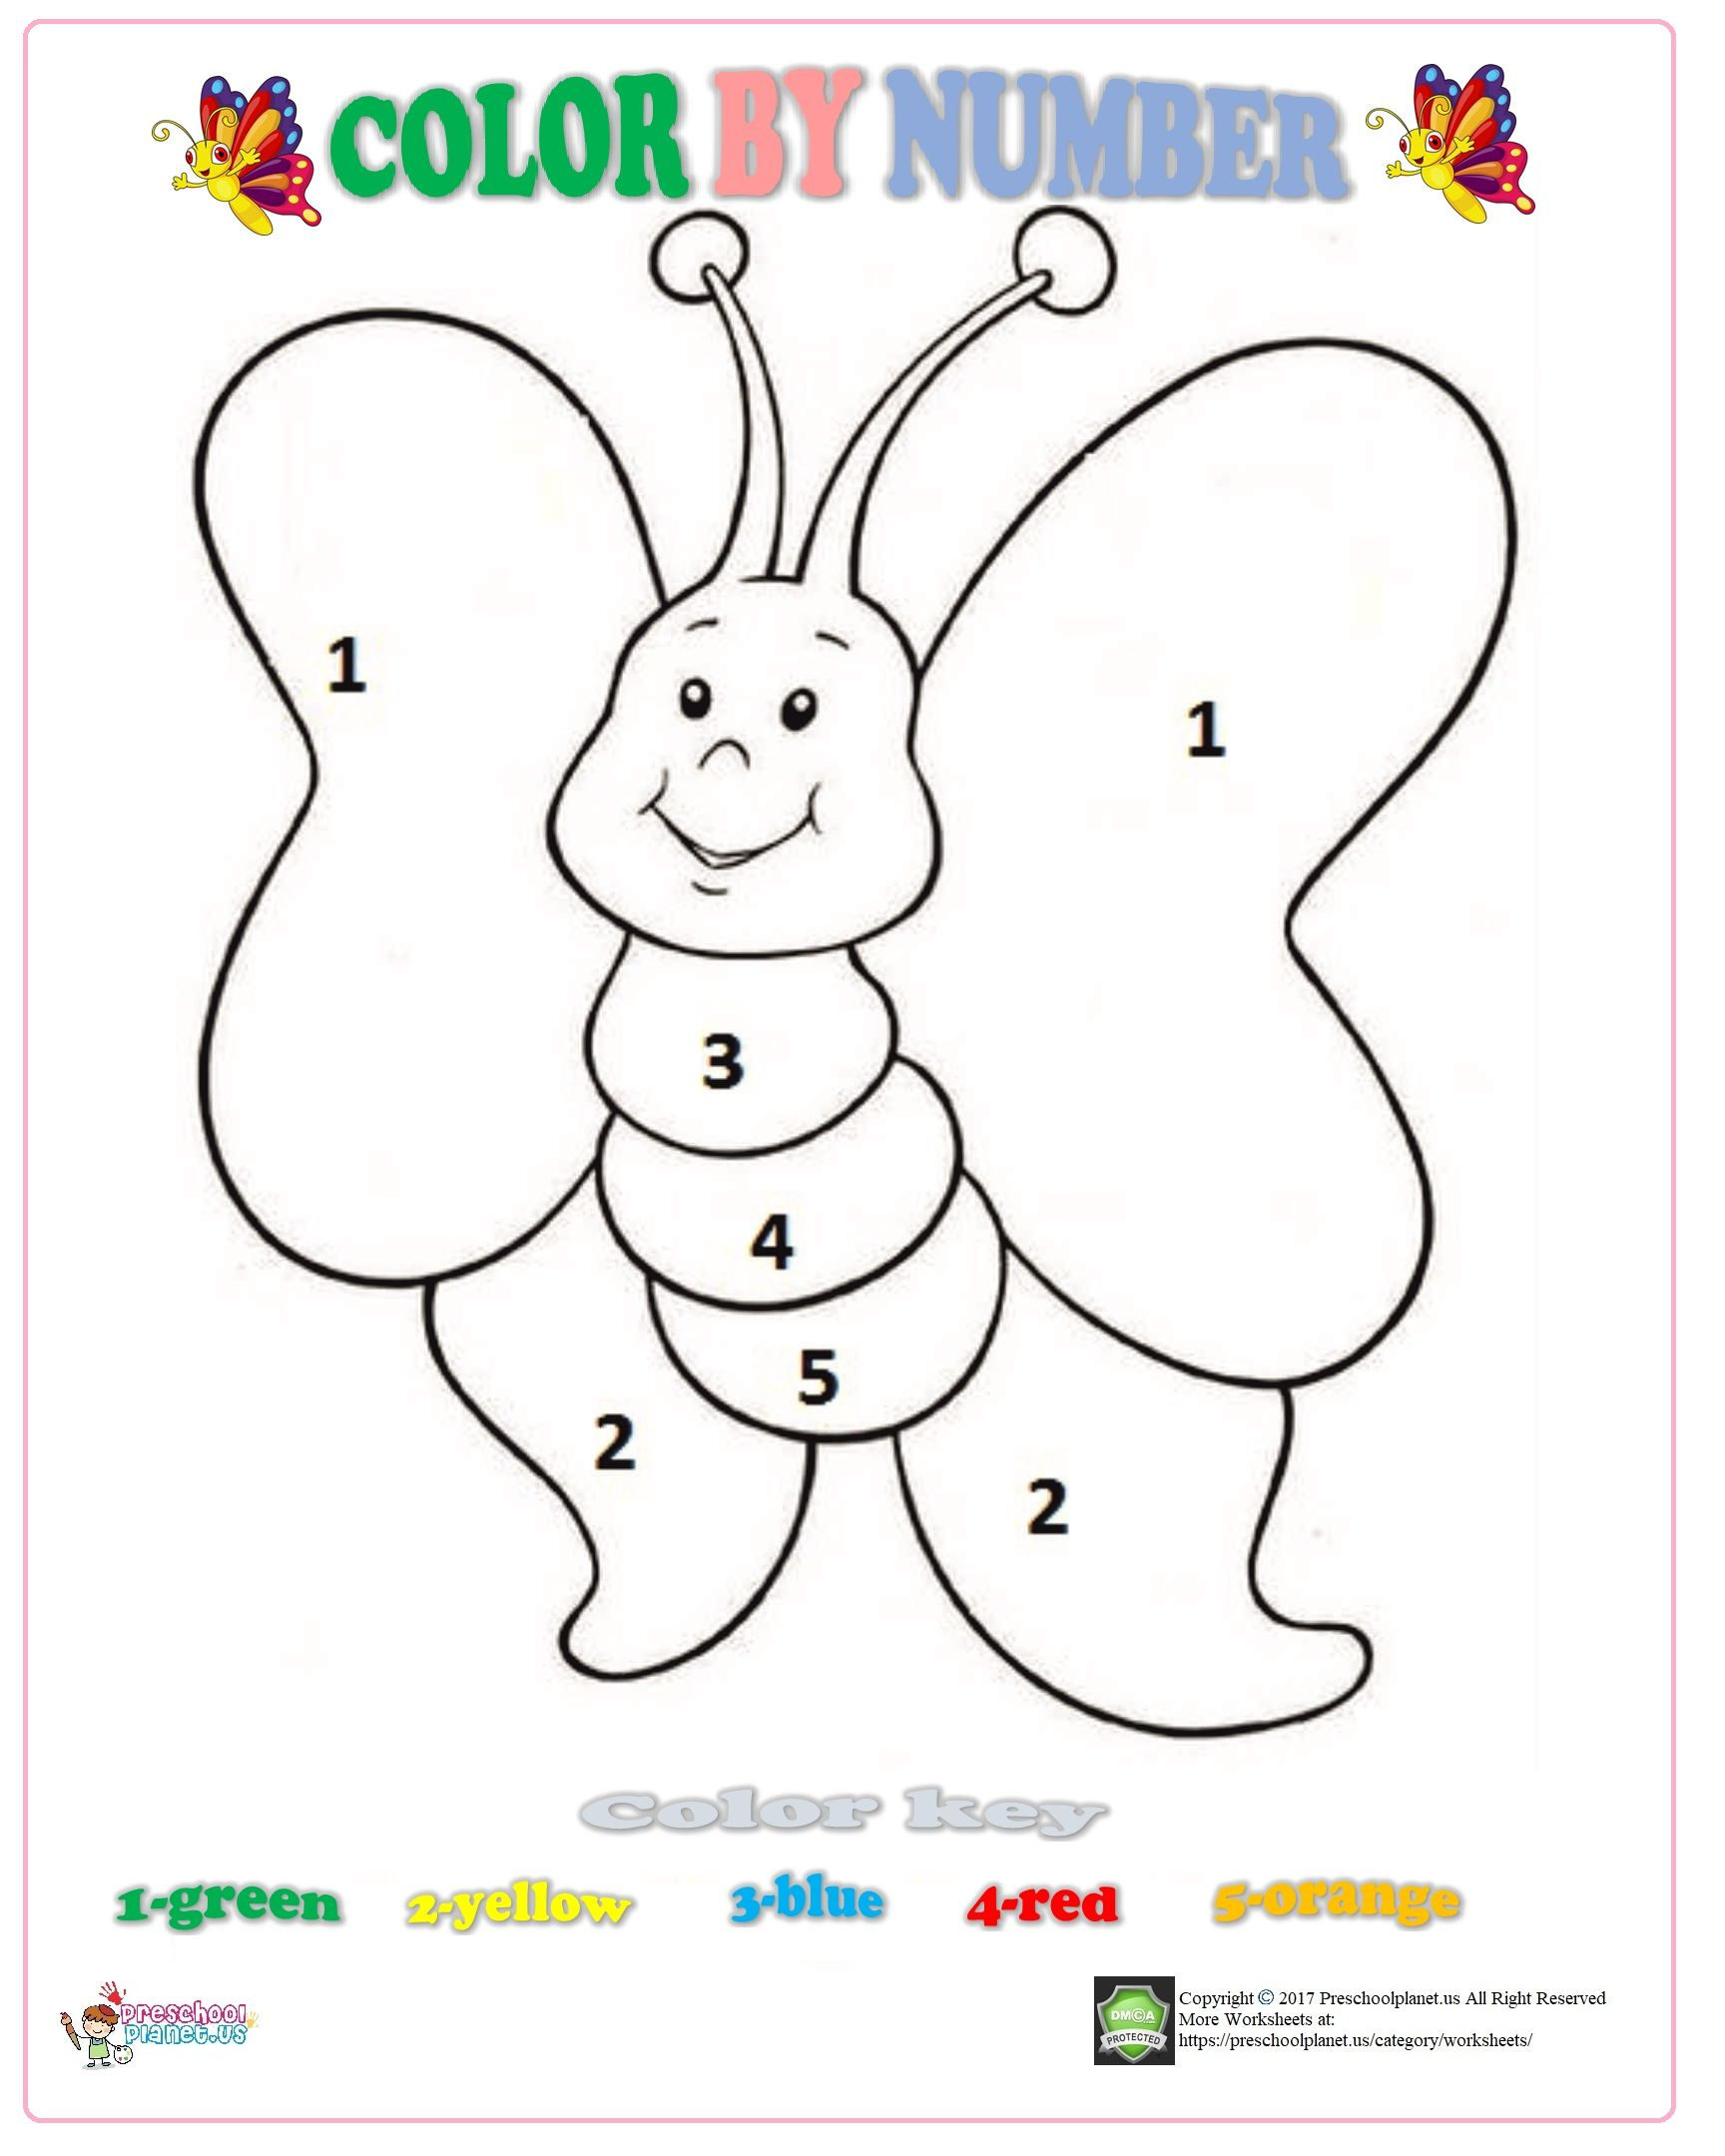 Color By Number Butterfly Worksheet Pintura Pano De 